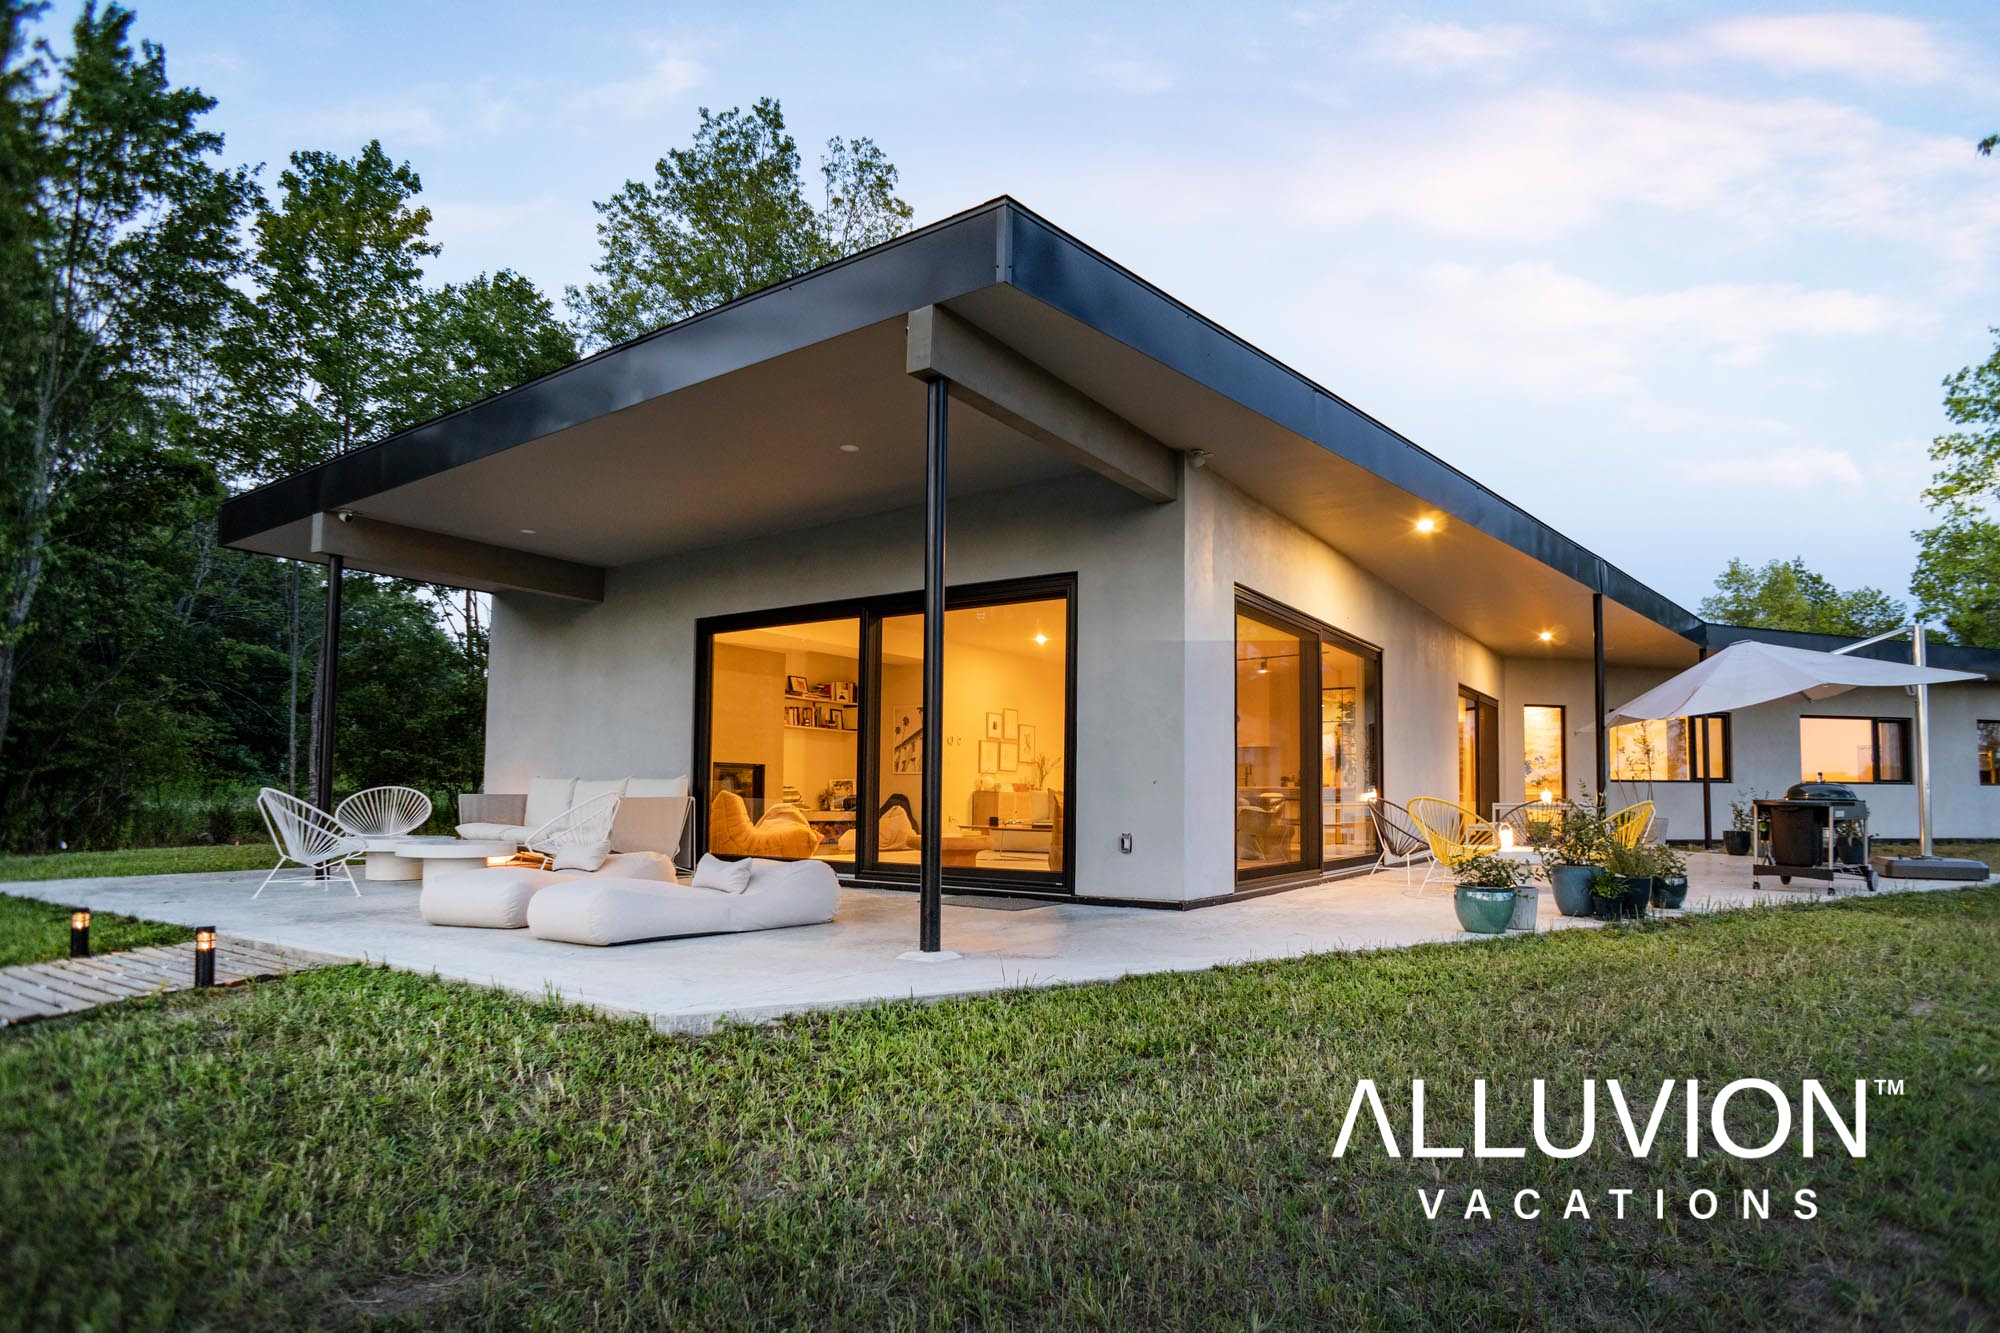 Experience the Magic of Hudson Valley with Alluvion Vacations – Luxury Airbnb Villa in the heart of Hudson Valley Farmland